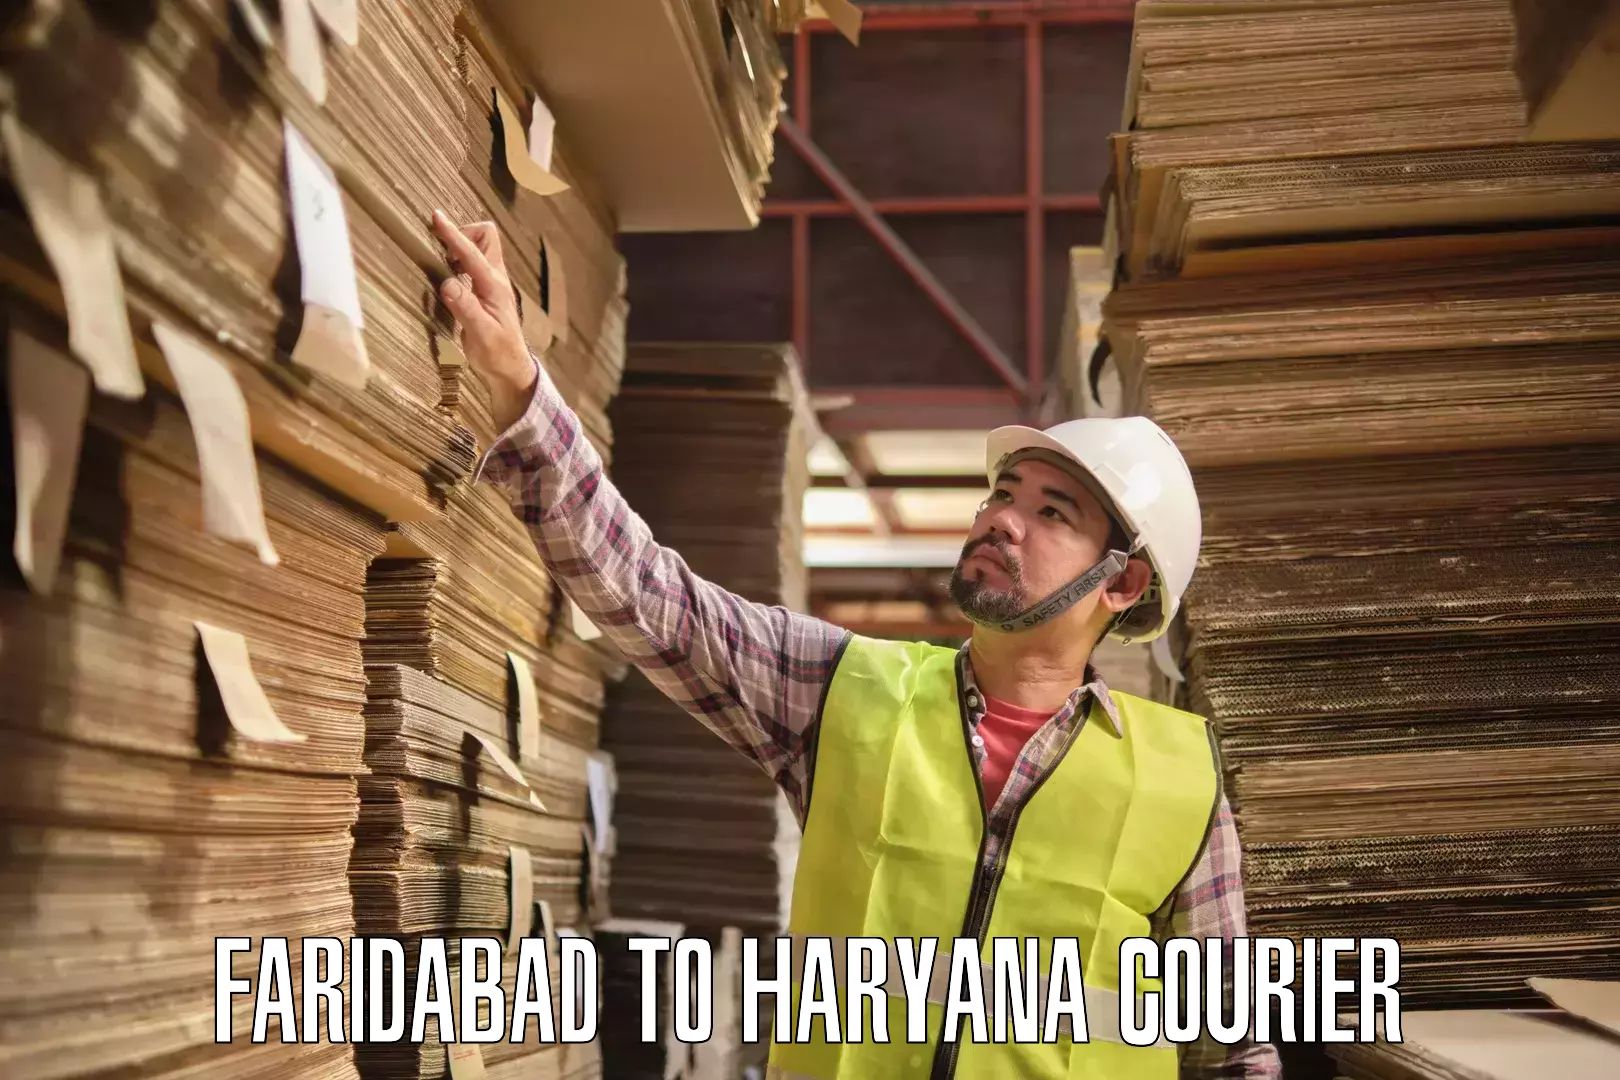 User-friendly courier app Faridabad to Hansi